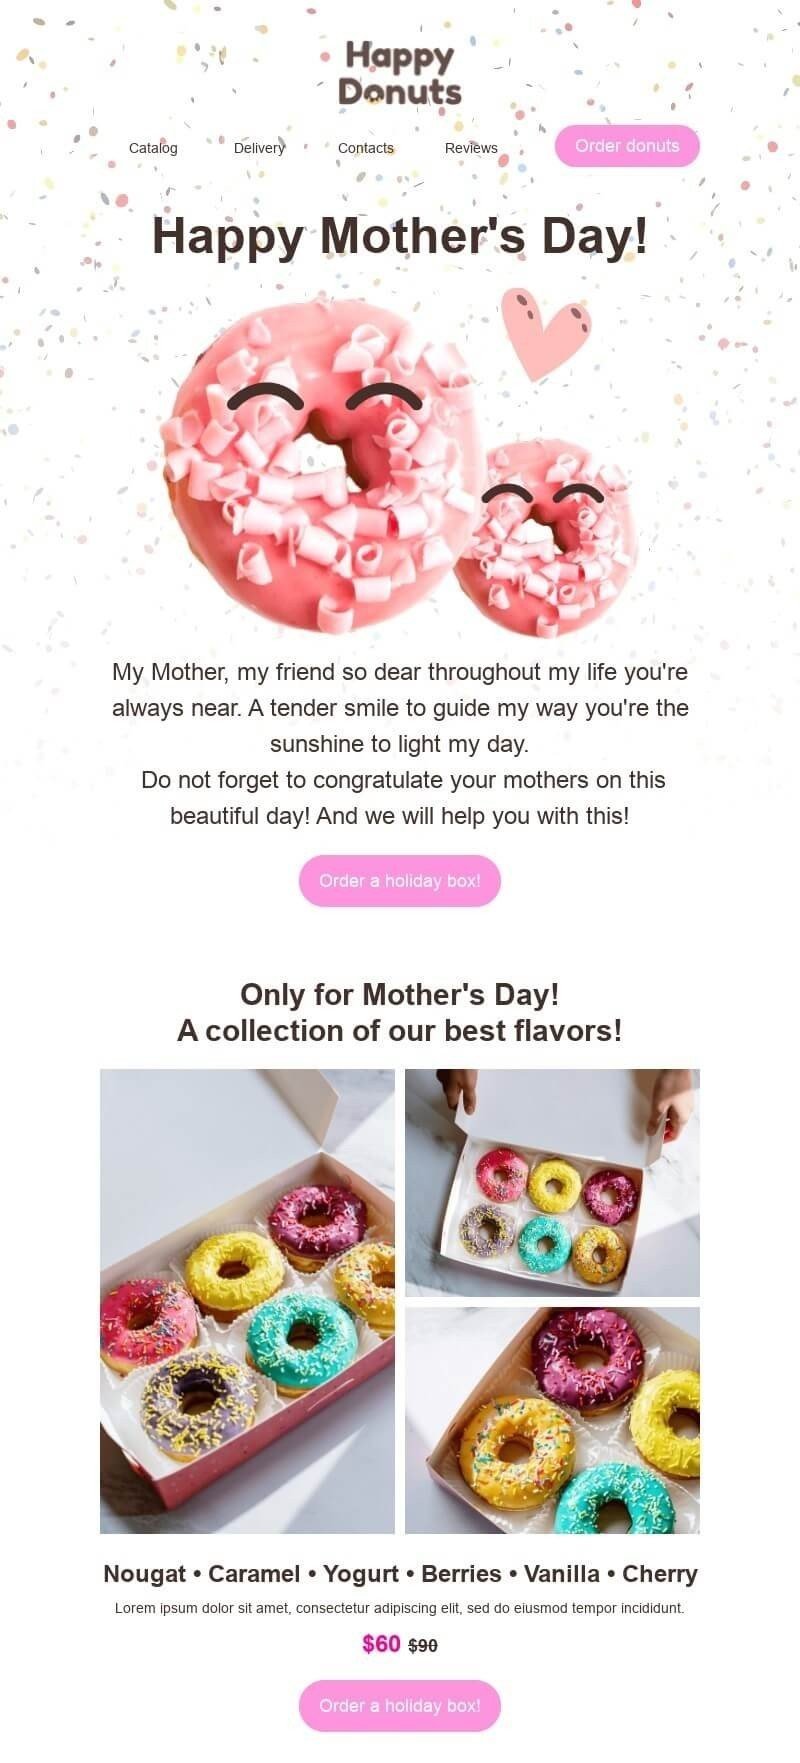 Mothers Day Email Template_The best flavors_Stripo